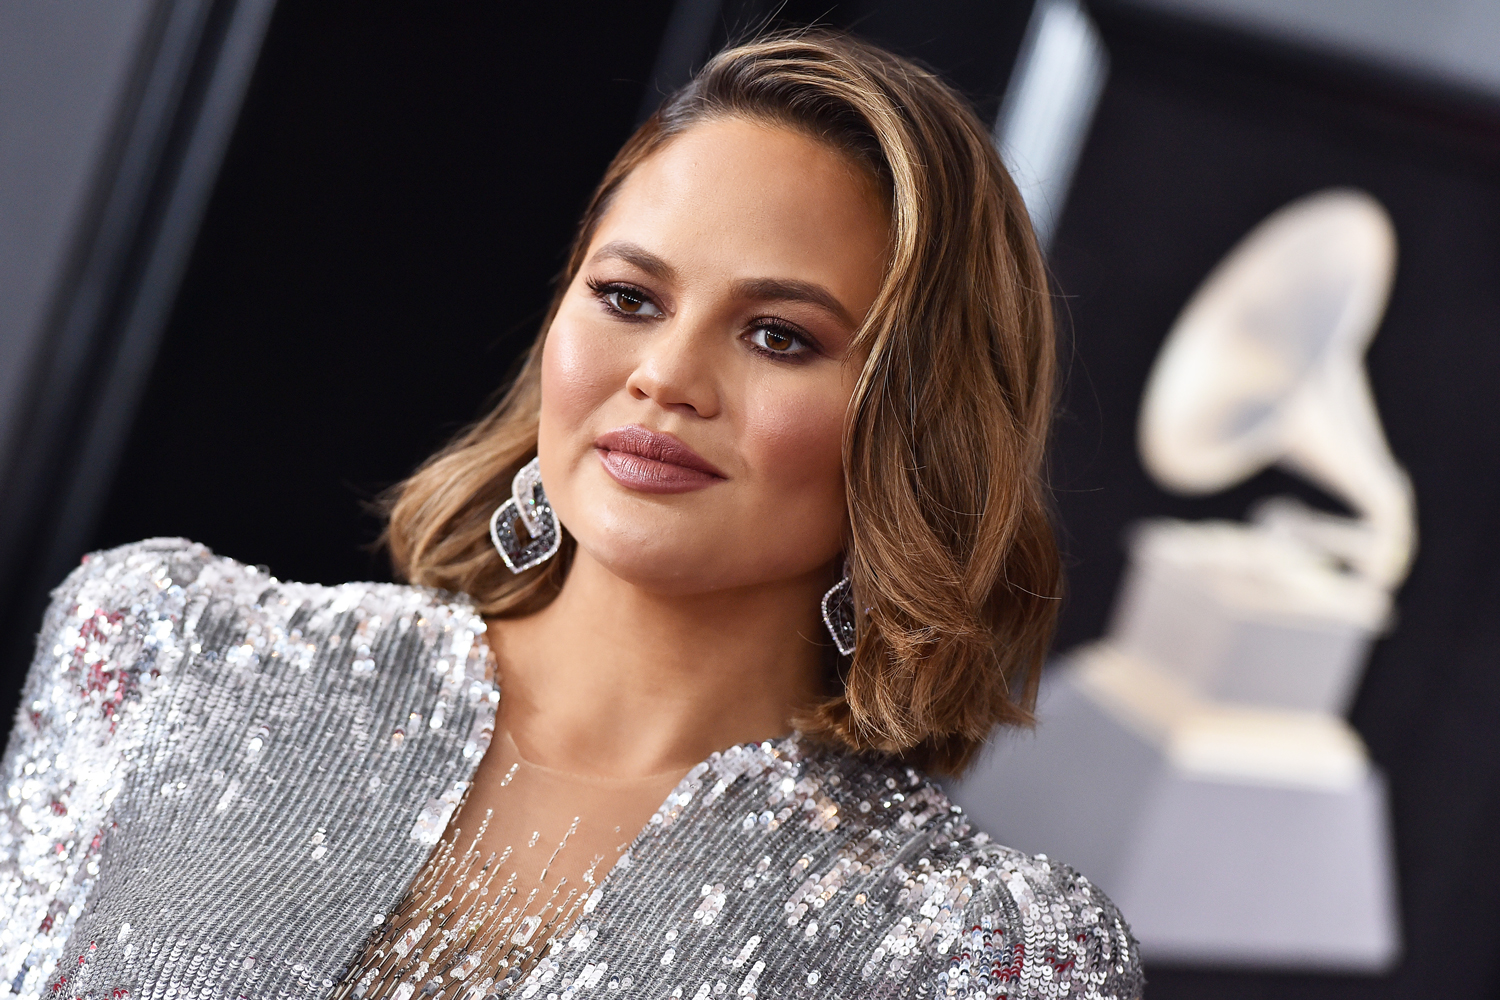 Chrissy Teigen Is On A Mission To Rid The World Of Language That “Undermines Women”